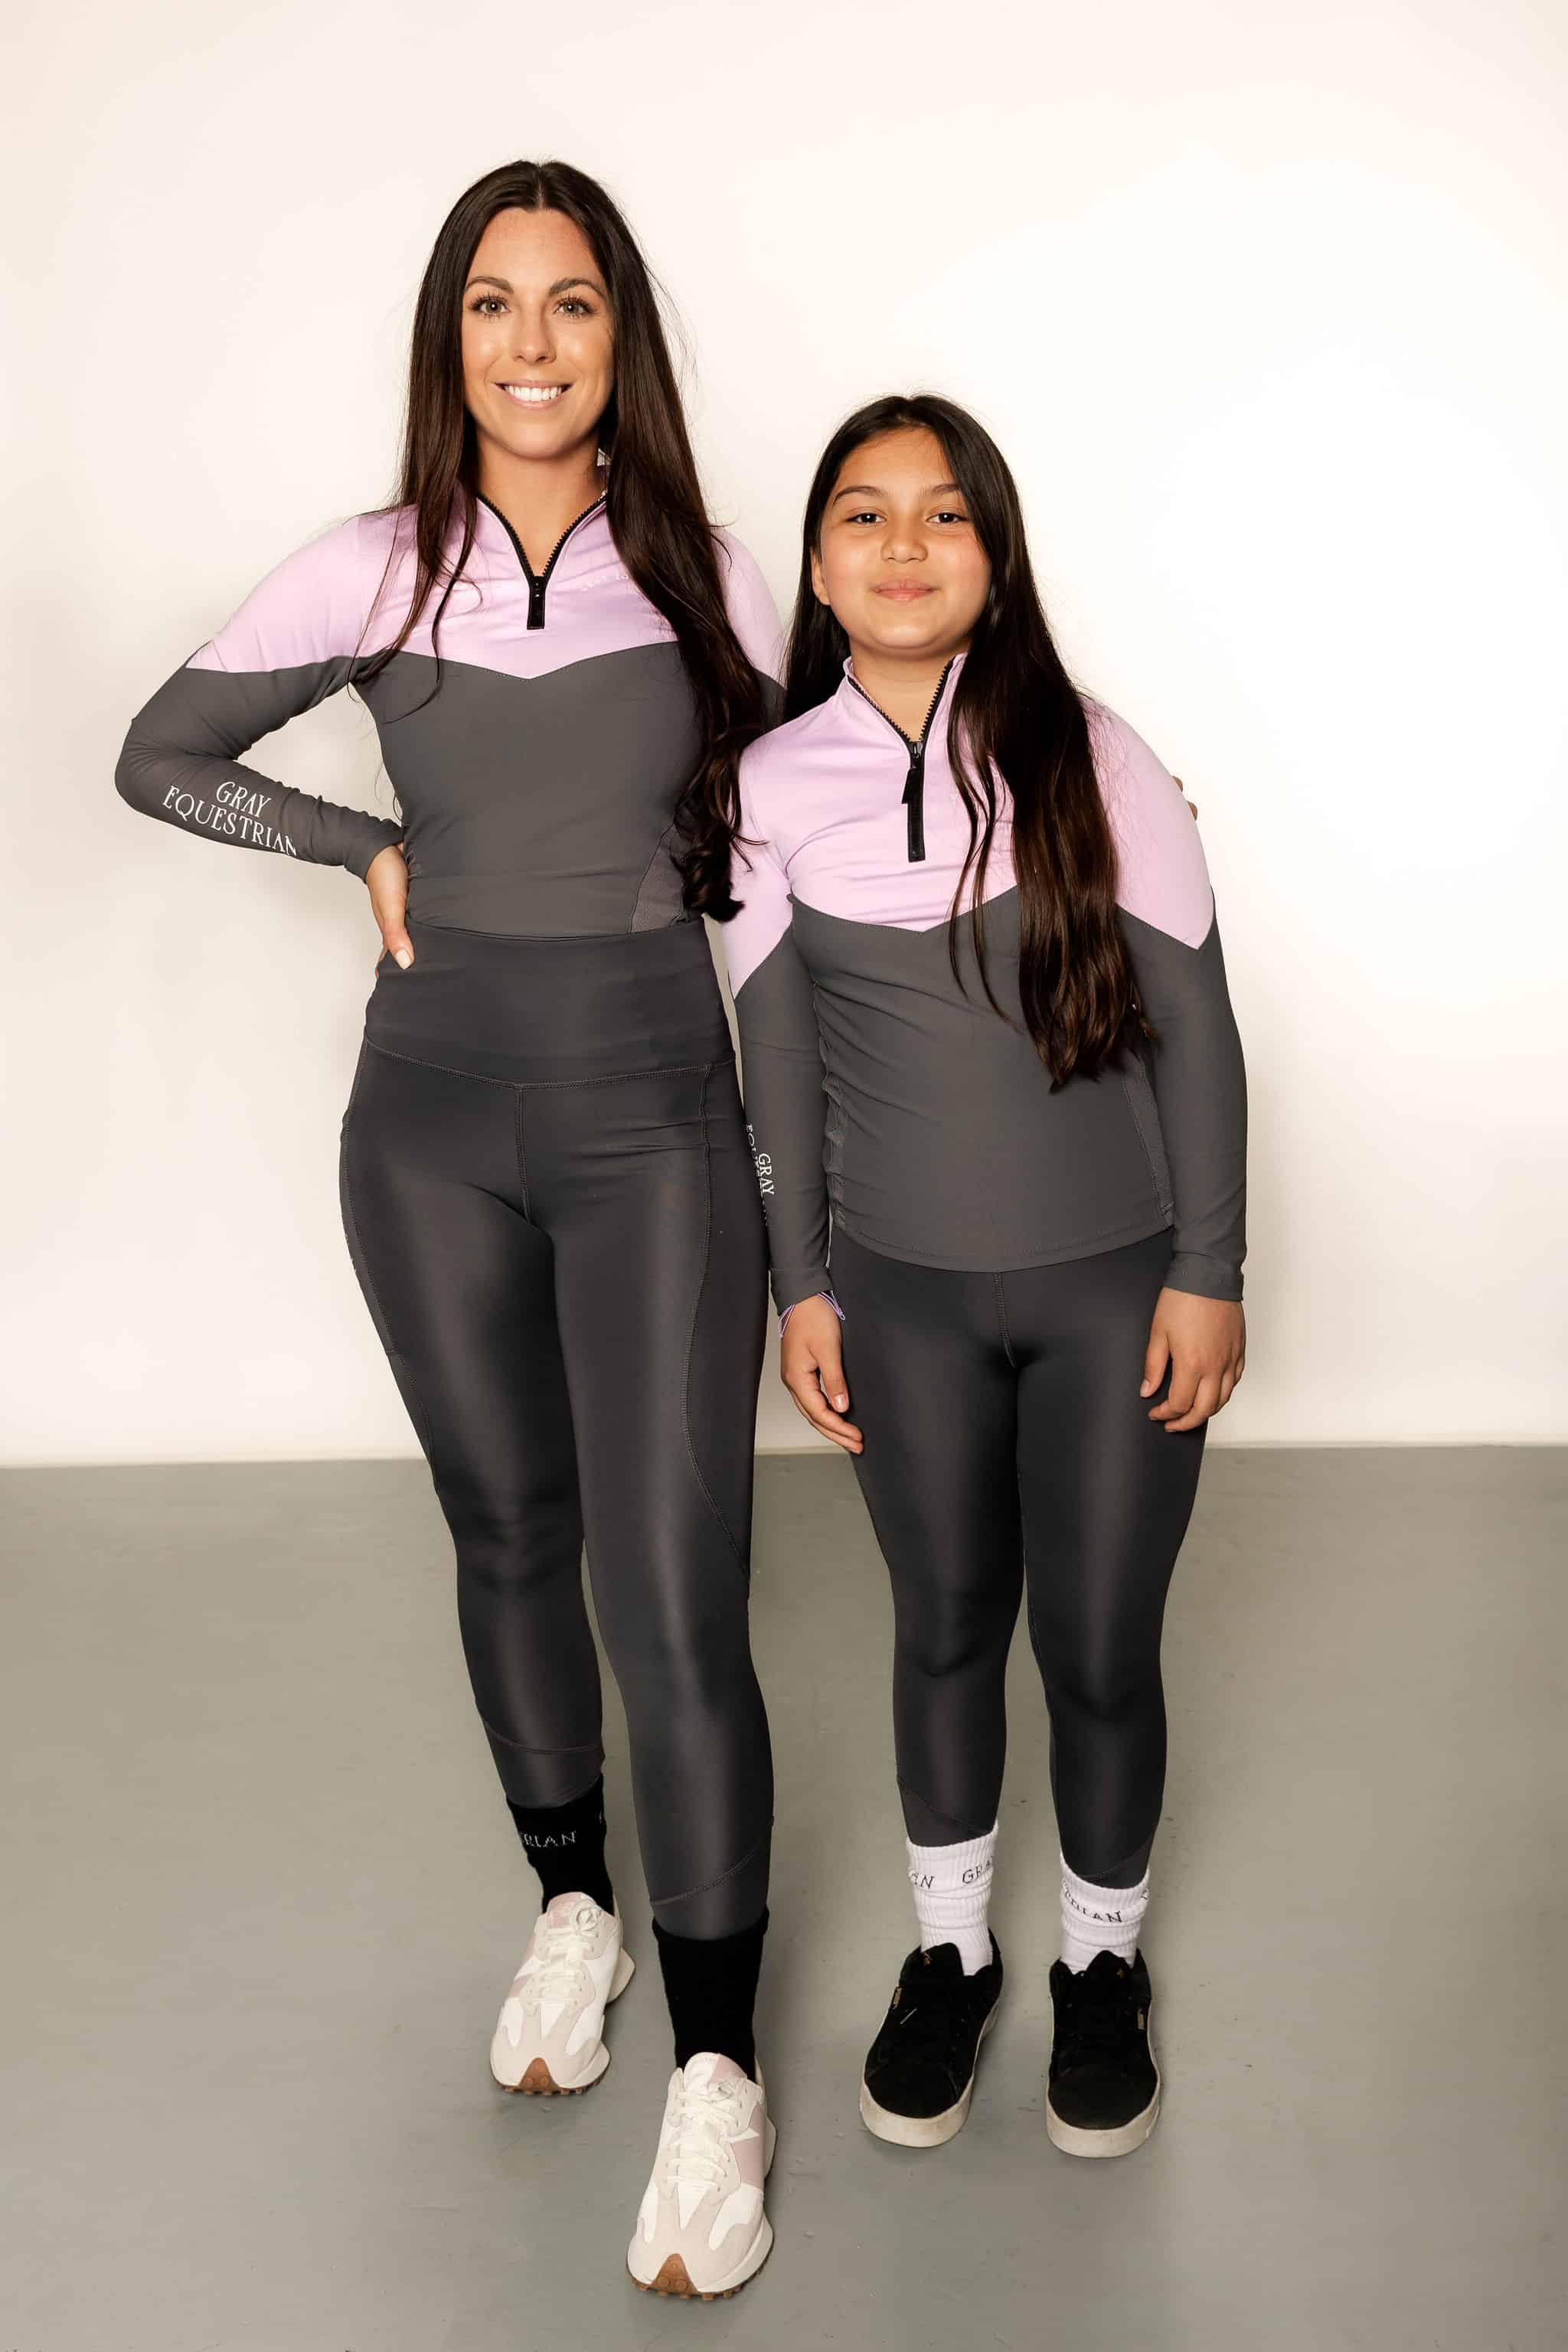 Two models, a young rider and an adult rider wearing the lilac and grey base layer top and grey leggings